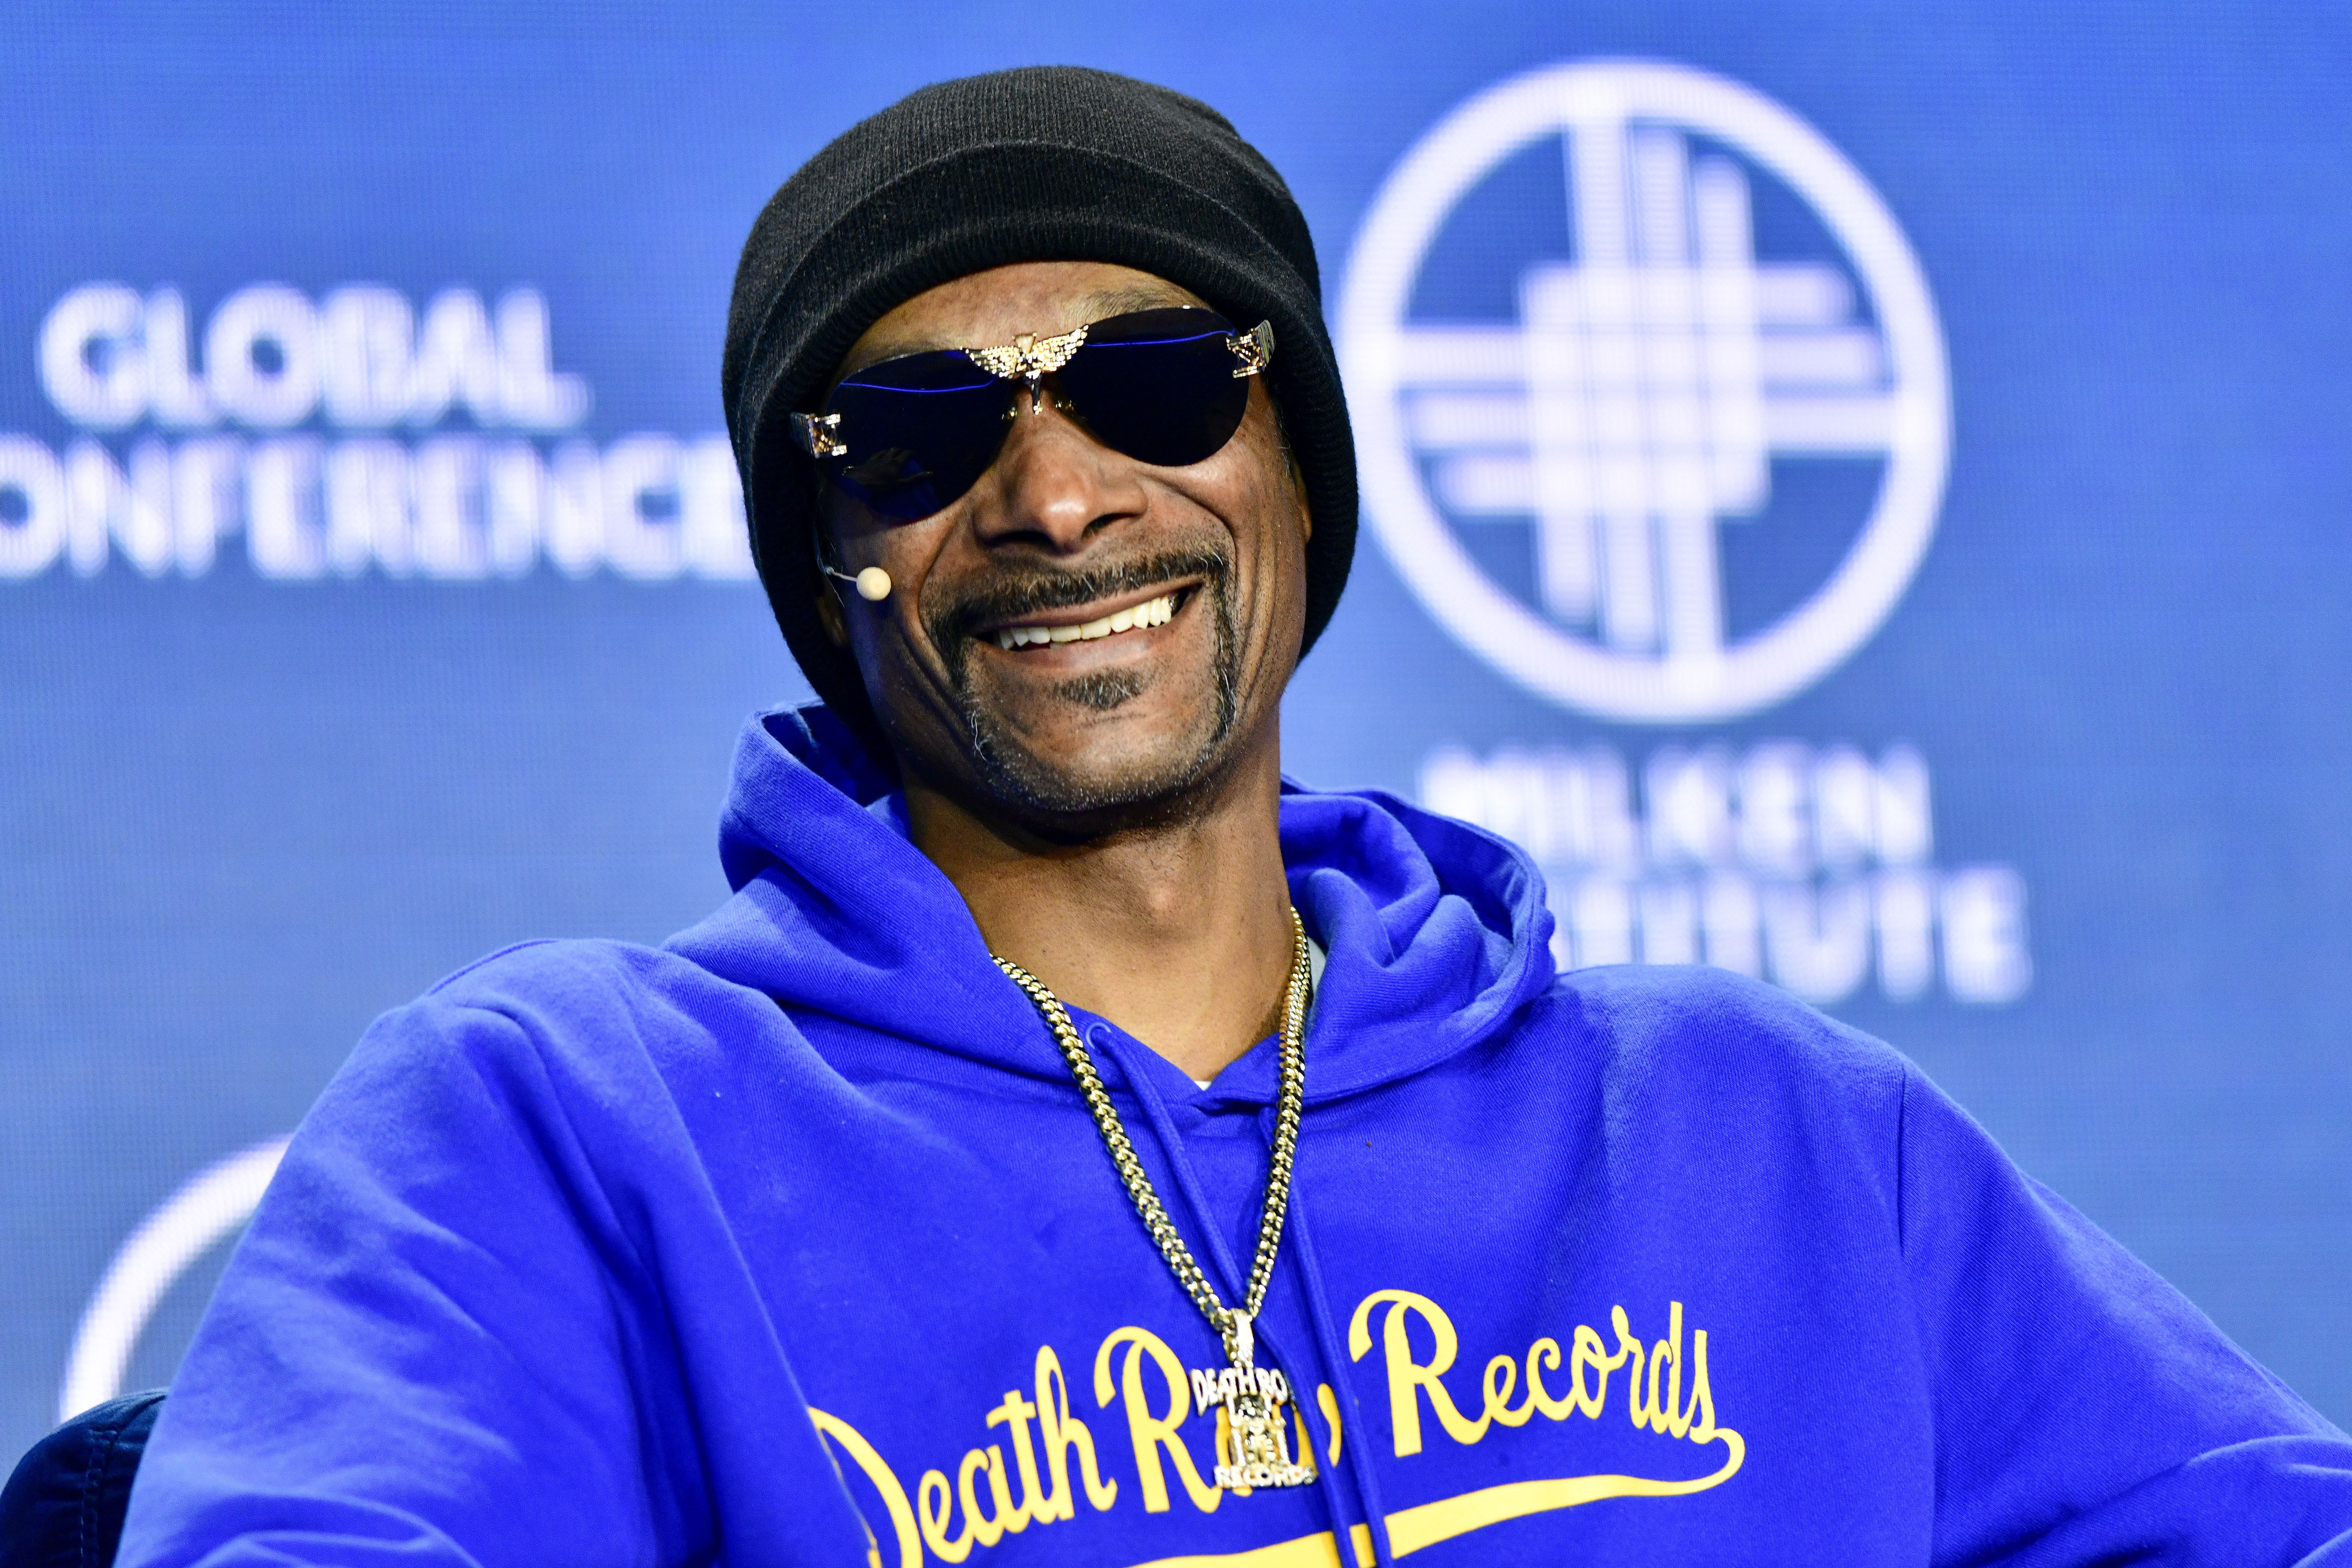 Snoop Dogg and Dr Dre are teaming up to bring out a new booze brand